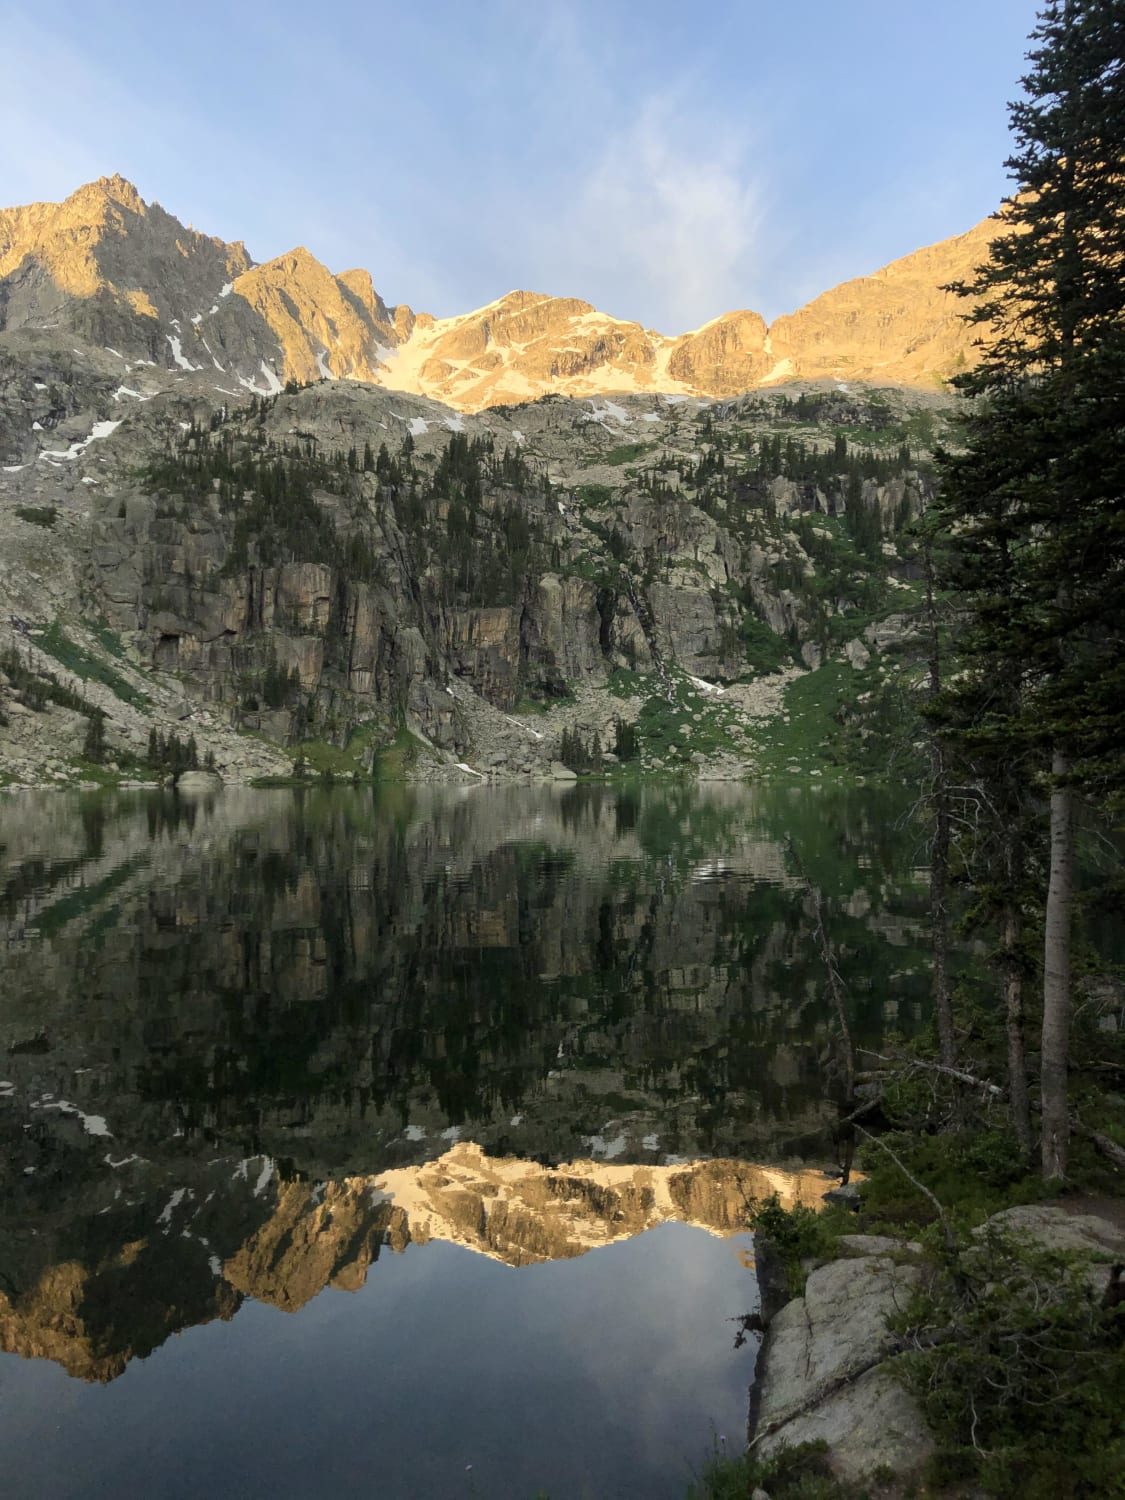 The reflection on Crater Lake at sunrise inside Colorado’s Indian Peaks Wilderness Area